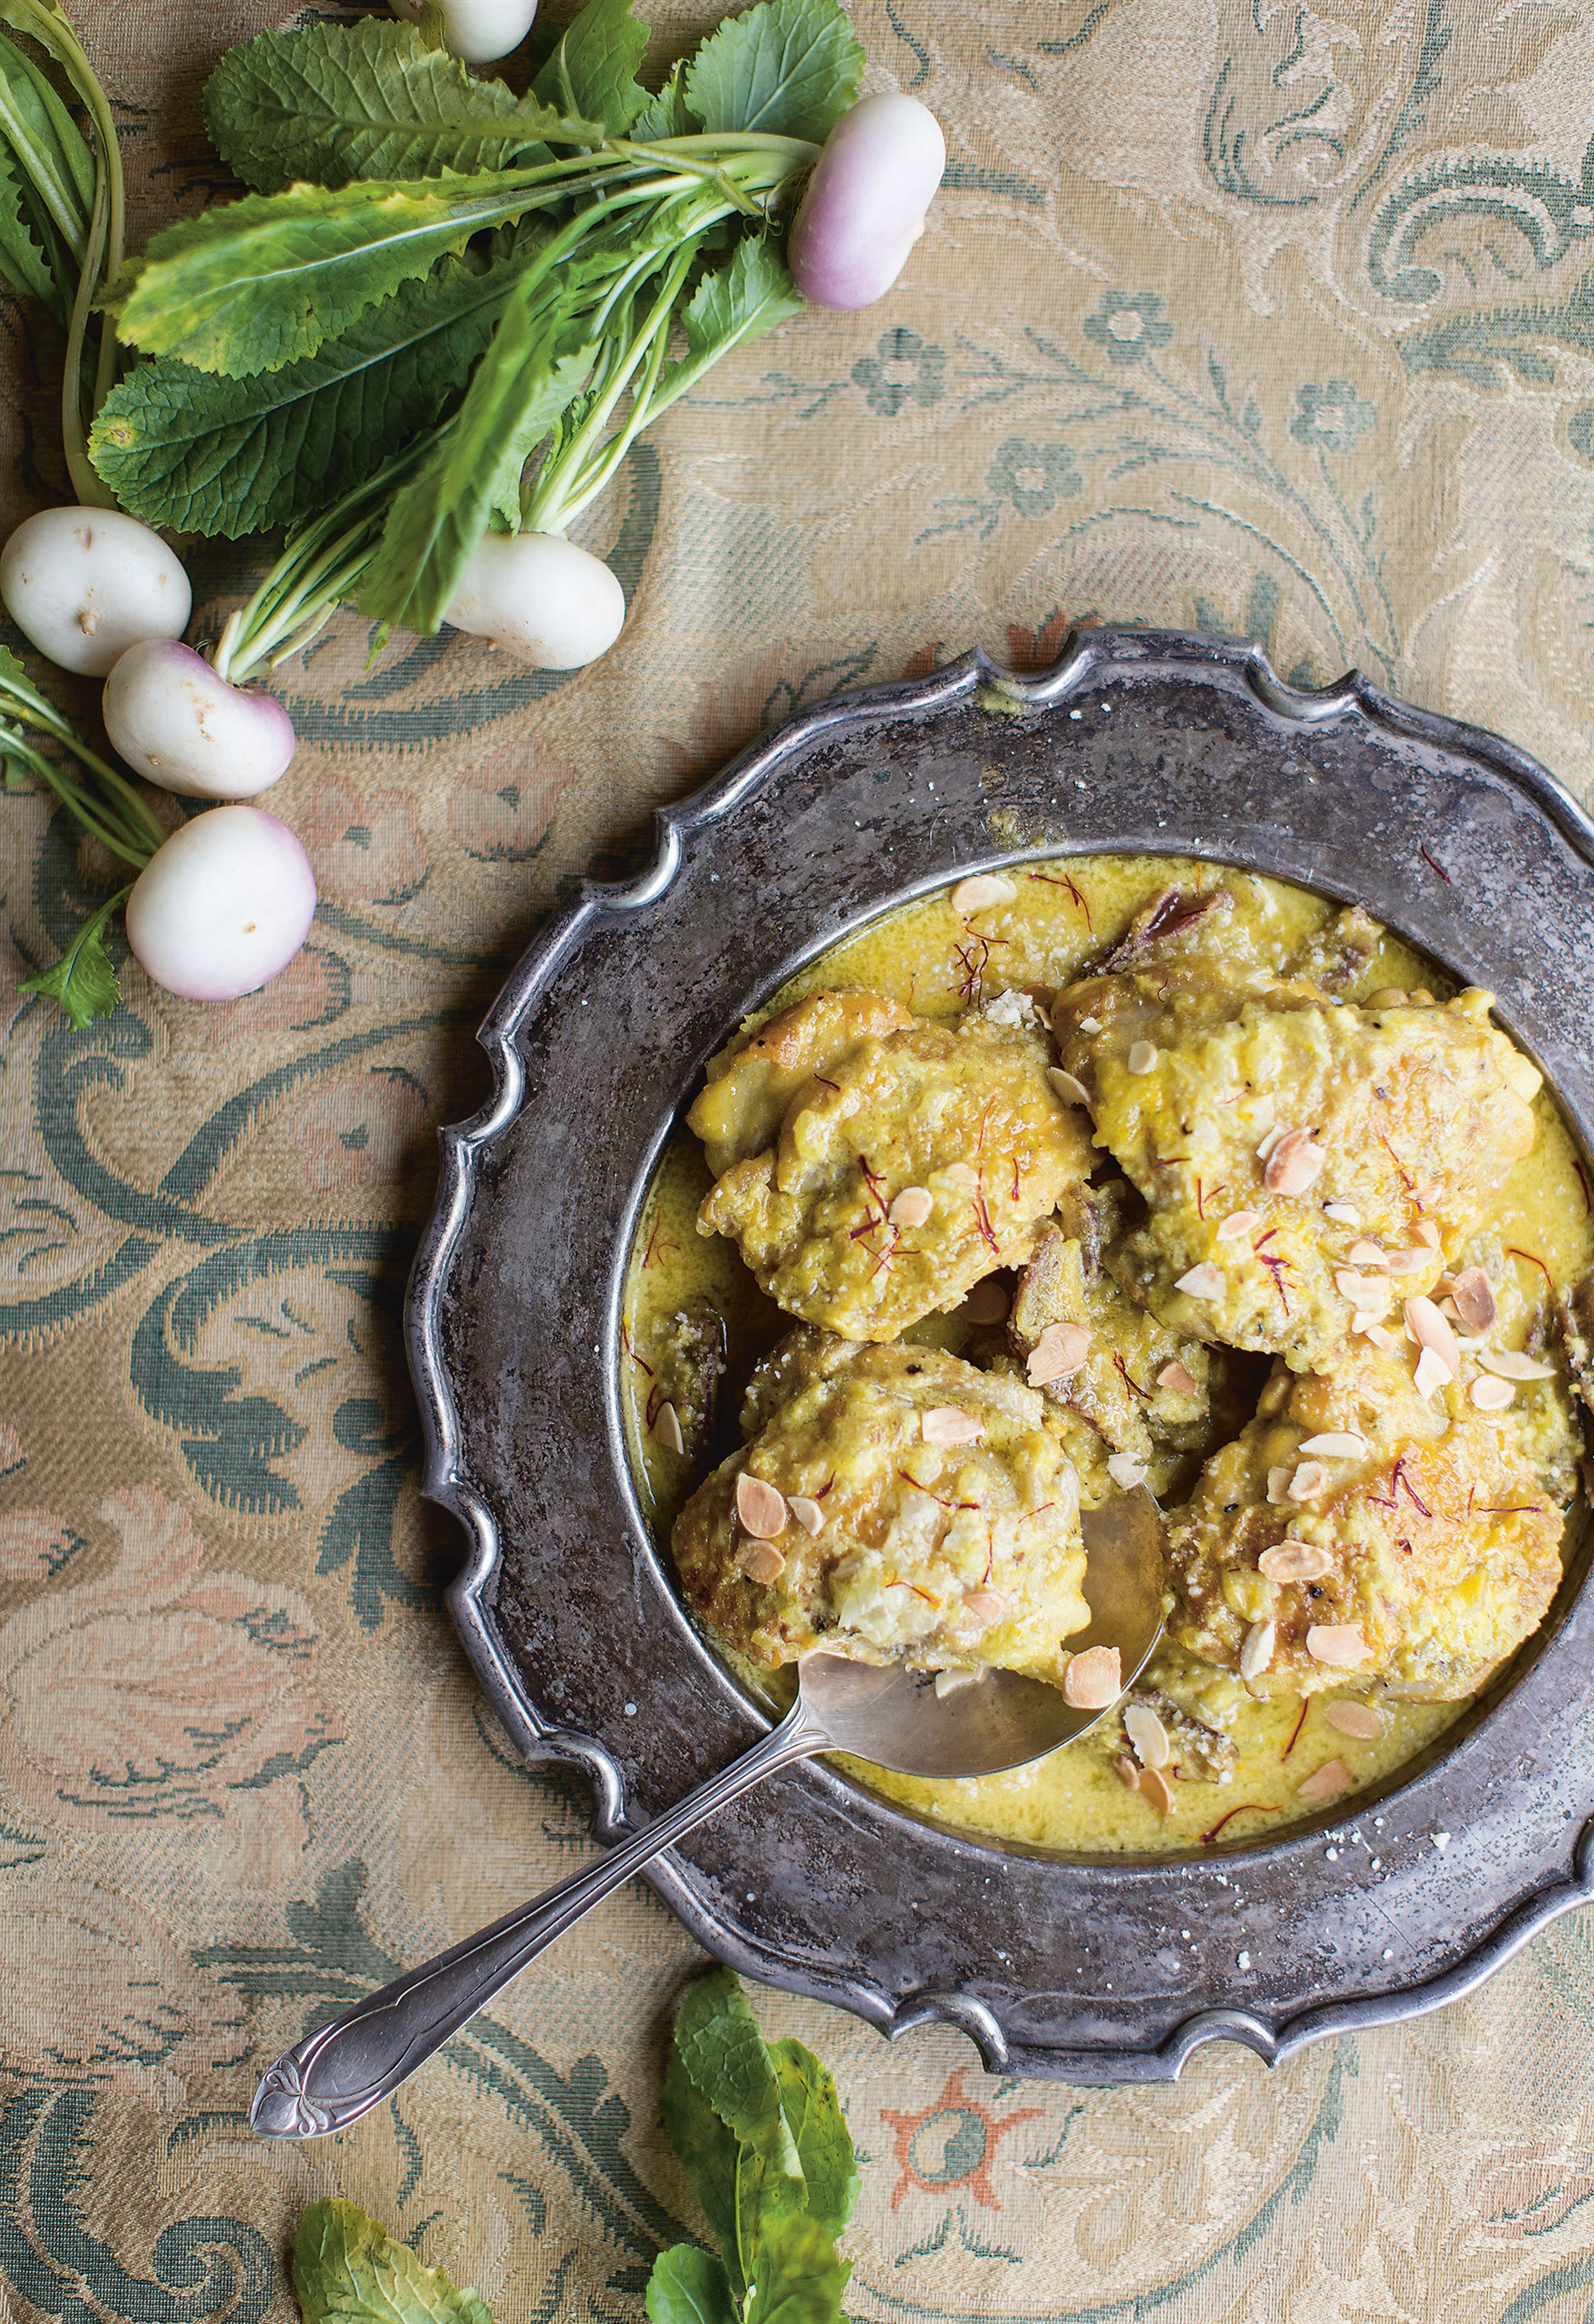 Chicken with ginger, saffron and dates